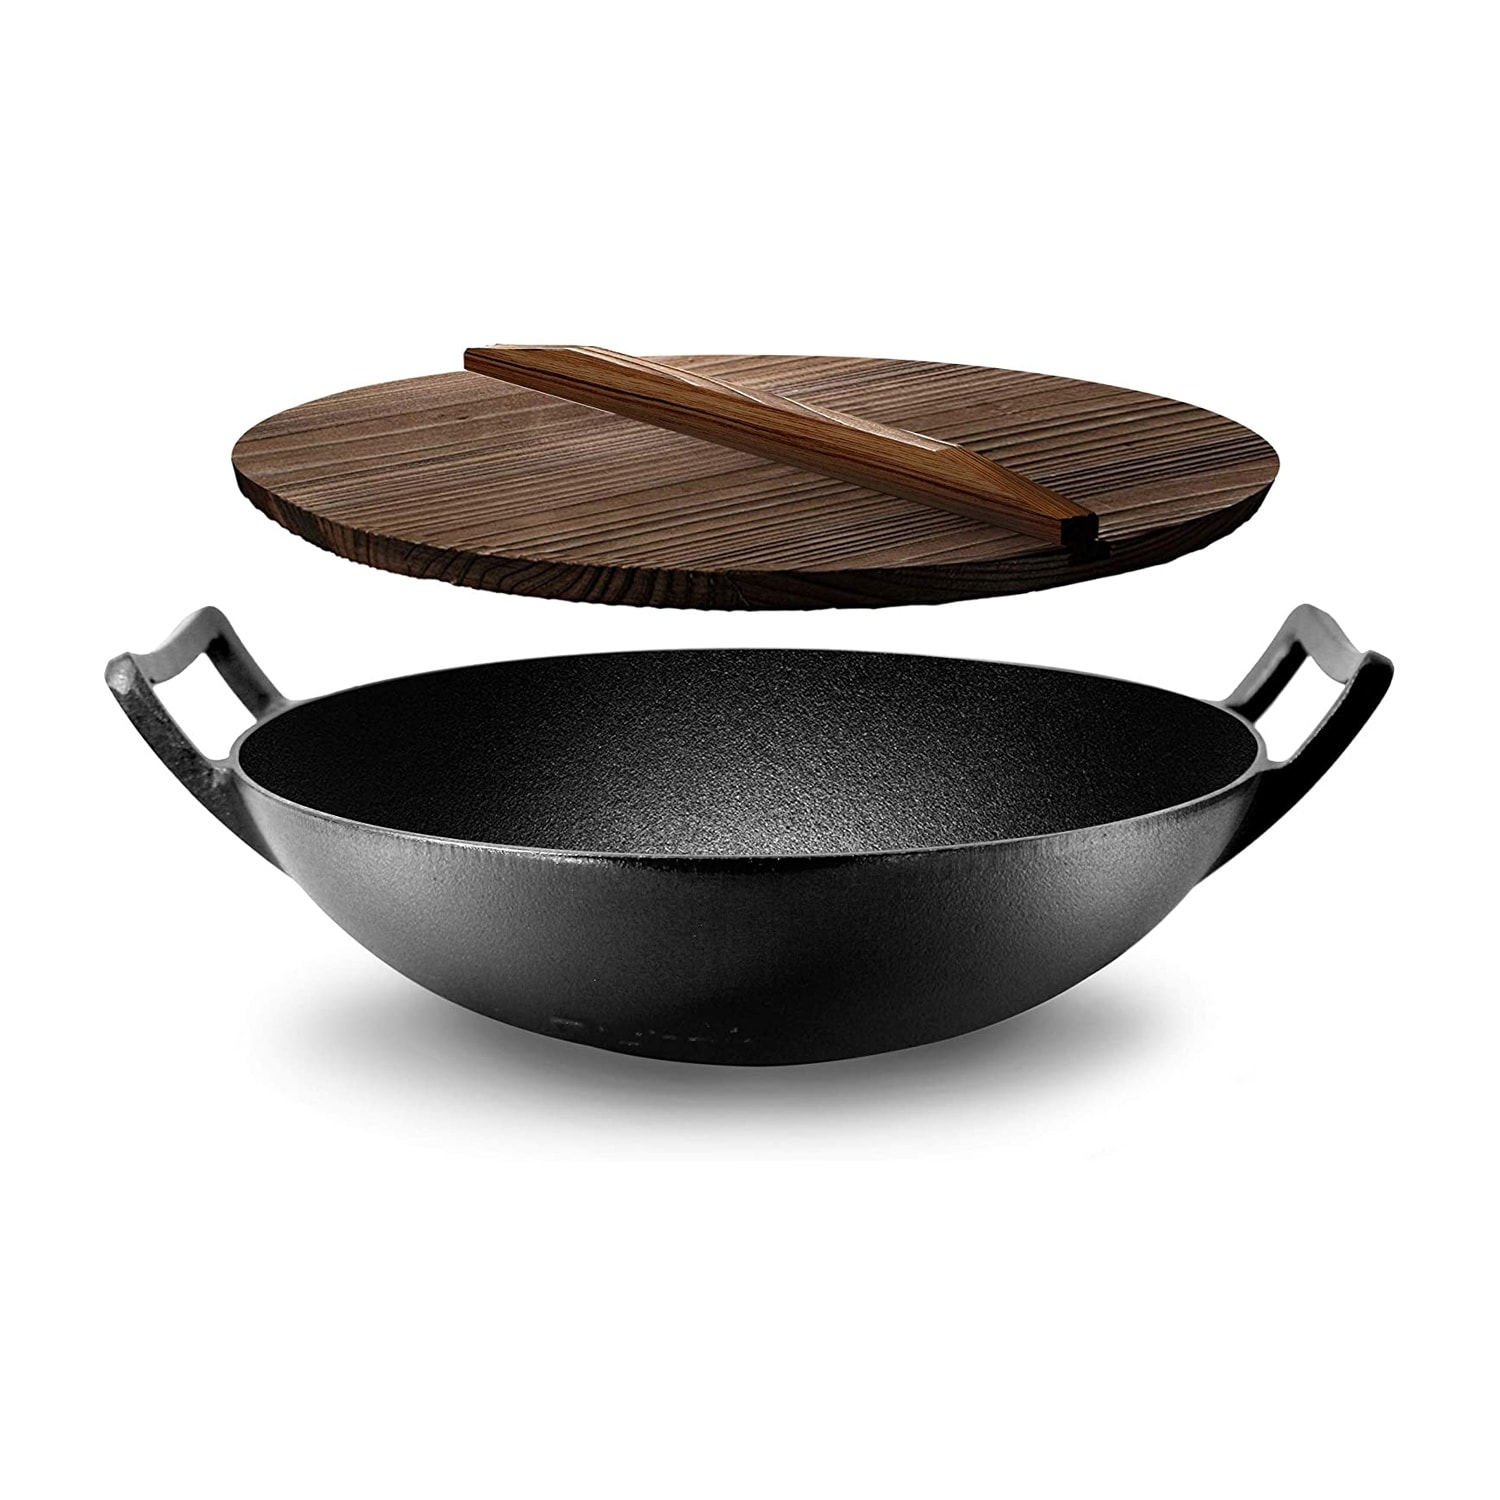 https://ak1.ostkcdn.com/images/products/is/images/direct/06214e55a1260cb9d126ab9dc66e3749e432290b/NutriChef-Pre-Seasoned-Cooking-Wok-Cast-Iron-Stir-Fry-Pan-w--Wooden-Lid-%282-Pack%29.jpg